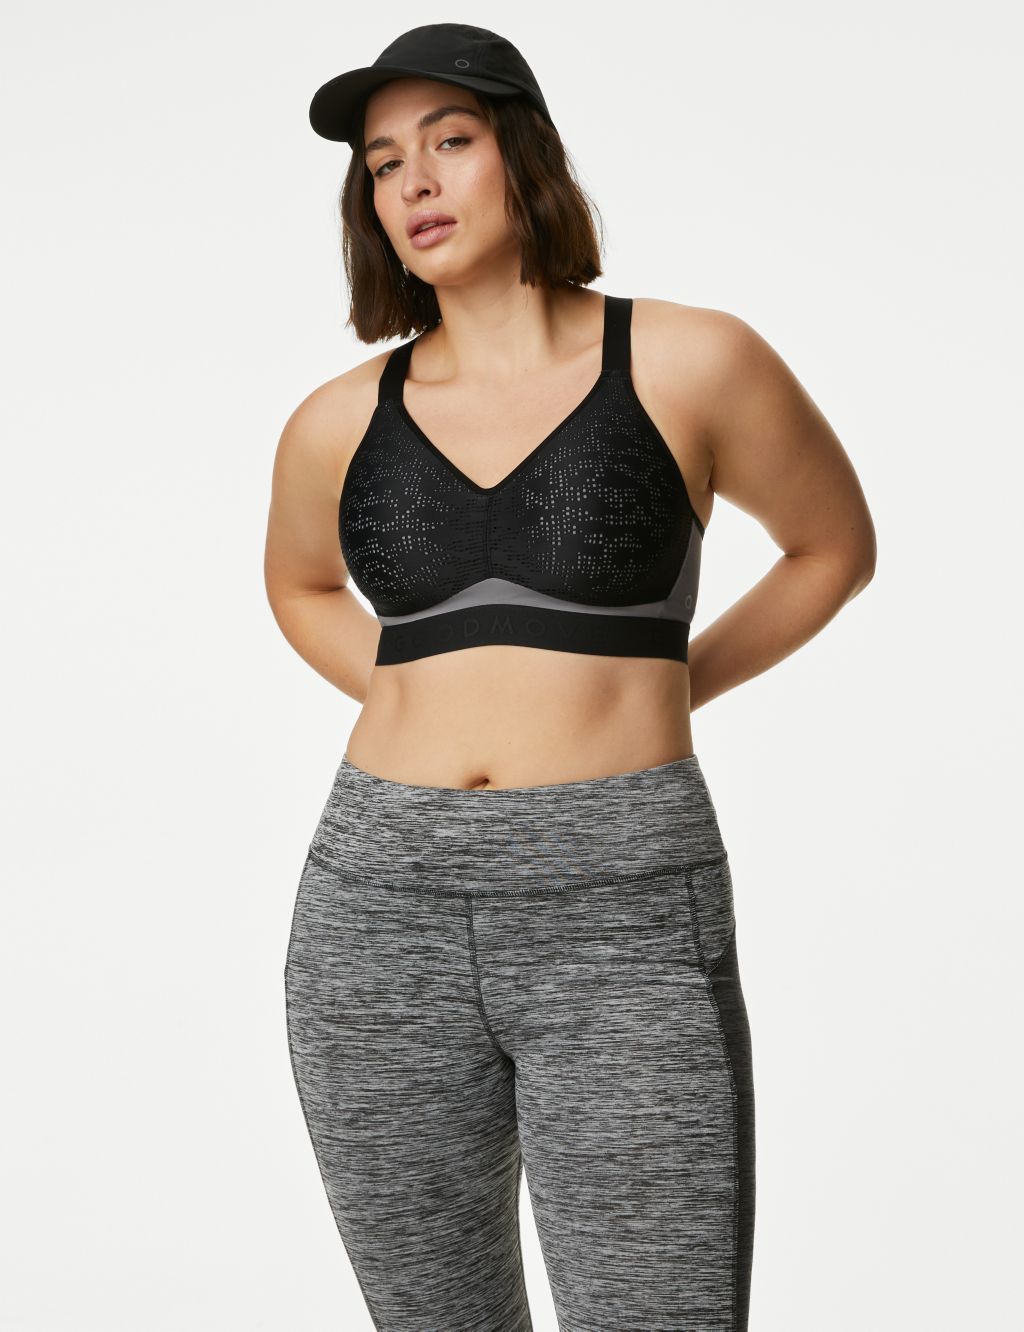 Shop GOODMOVE Womens High Impact Sports Bra up to 70% Off